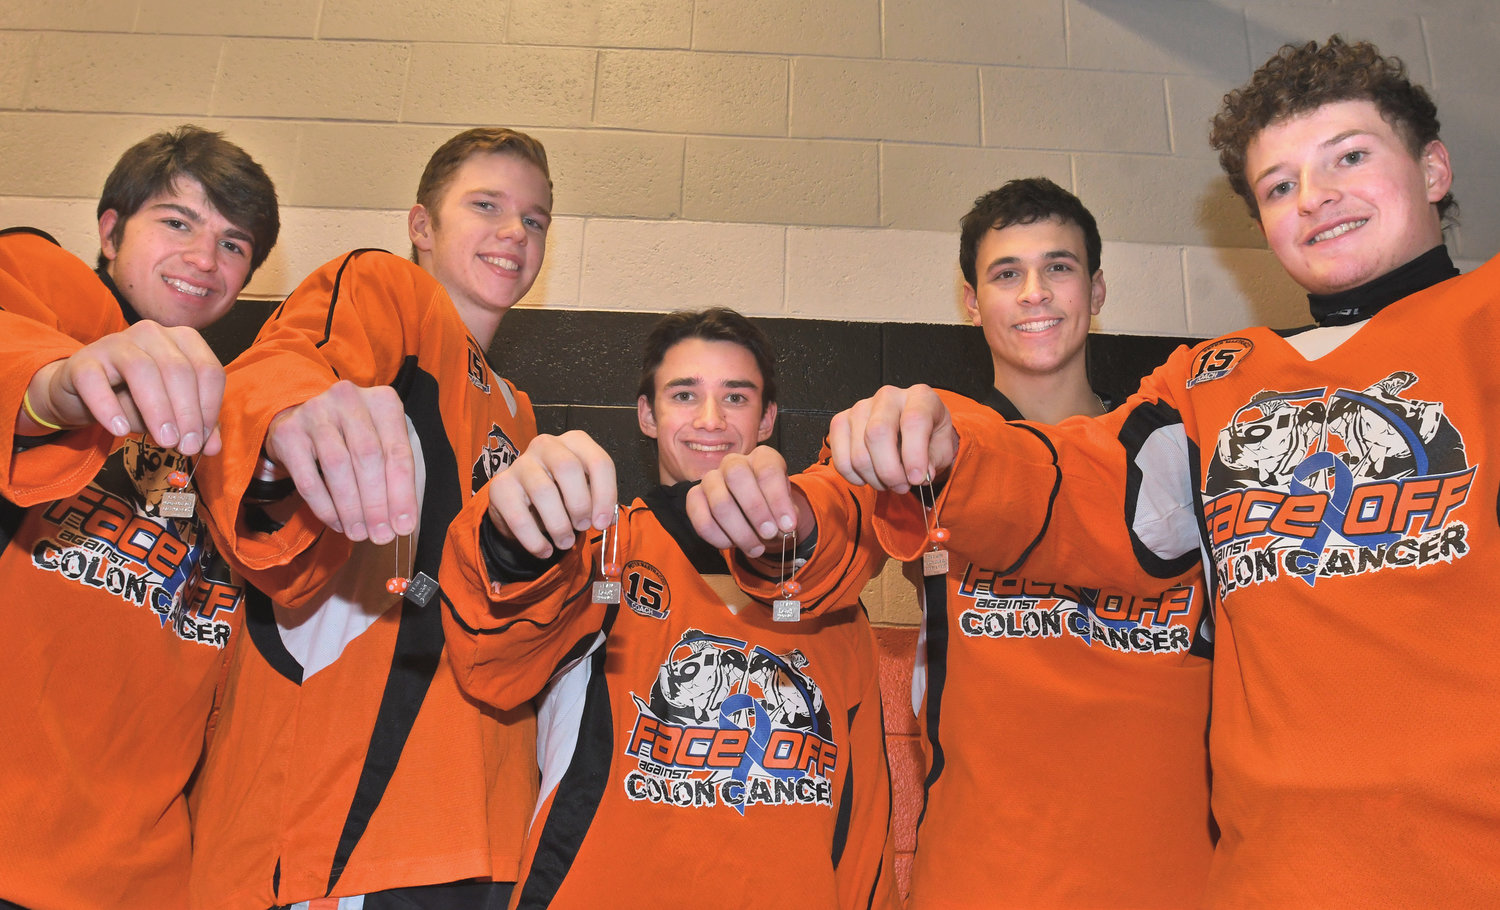 BEADS OF COURAGE — The Rome Free Academy ice hockey seniors hold up their Beads of Courage worn during Friday night's Face Off Against Colon Cancer benefit game at Kennedy Arena. From left: Michael Bostwick, Kyle Clark, Dylan Gannon, Danny Mecca and Aaron Simons. Pinned to their special orange jerseys, the beads are in honor of the Maureen's Hope Foundation. The players wrote messages of inspiration on them to children battling cancer. The beads are given to the foundation and distributed to children with cancer after treatment milestones. The recipients use them to make bracelets and necklaces that tell the story of their fight against cancer.